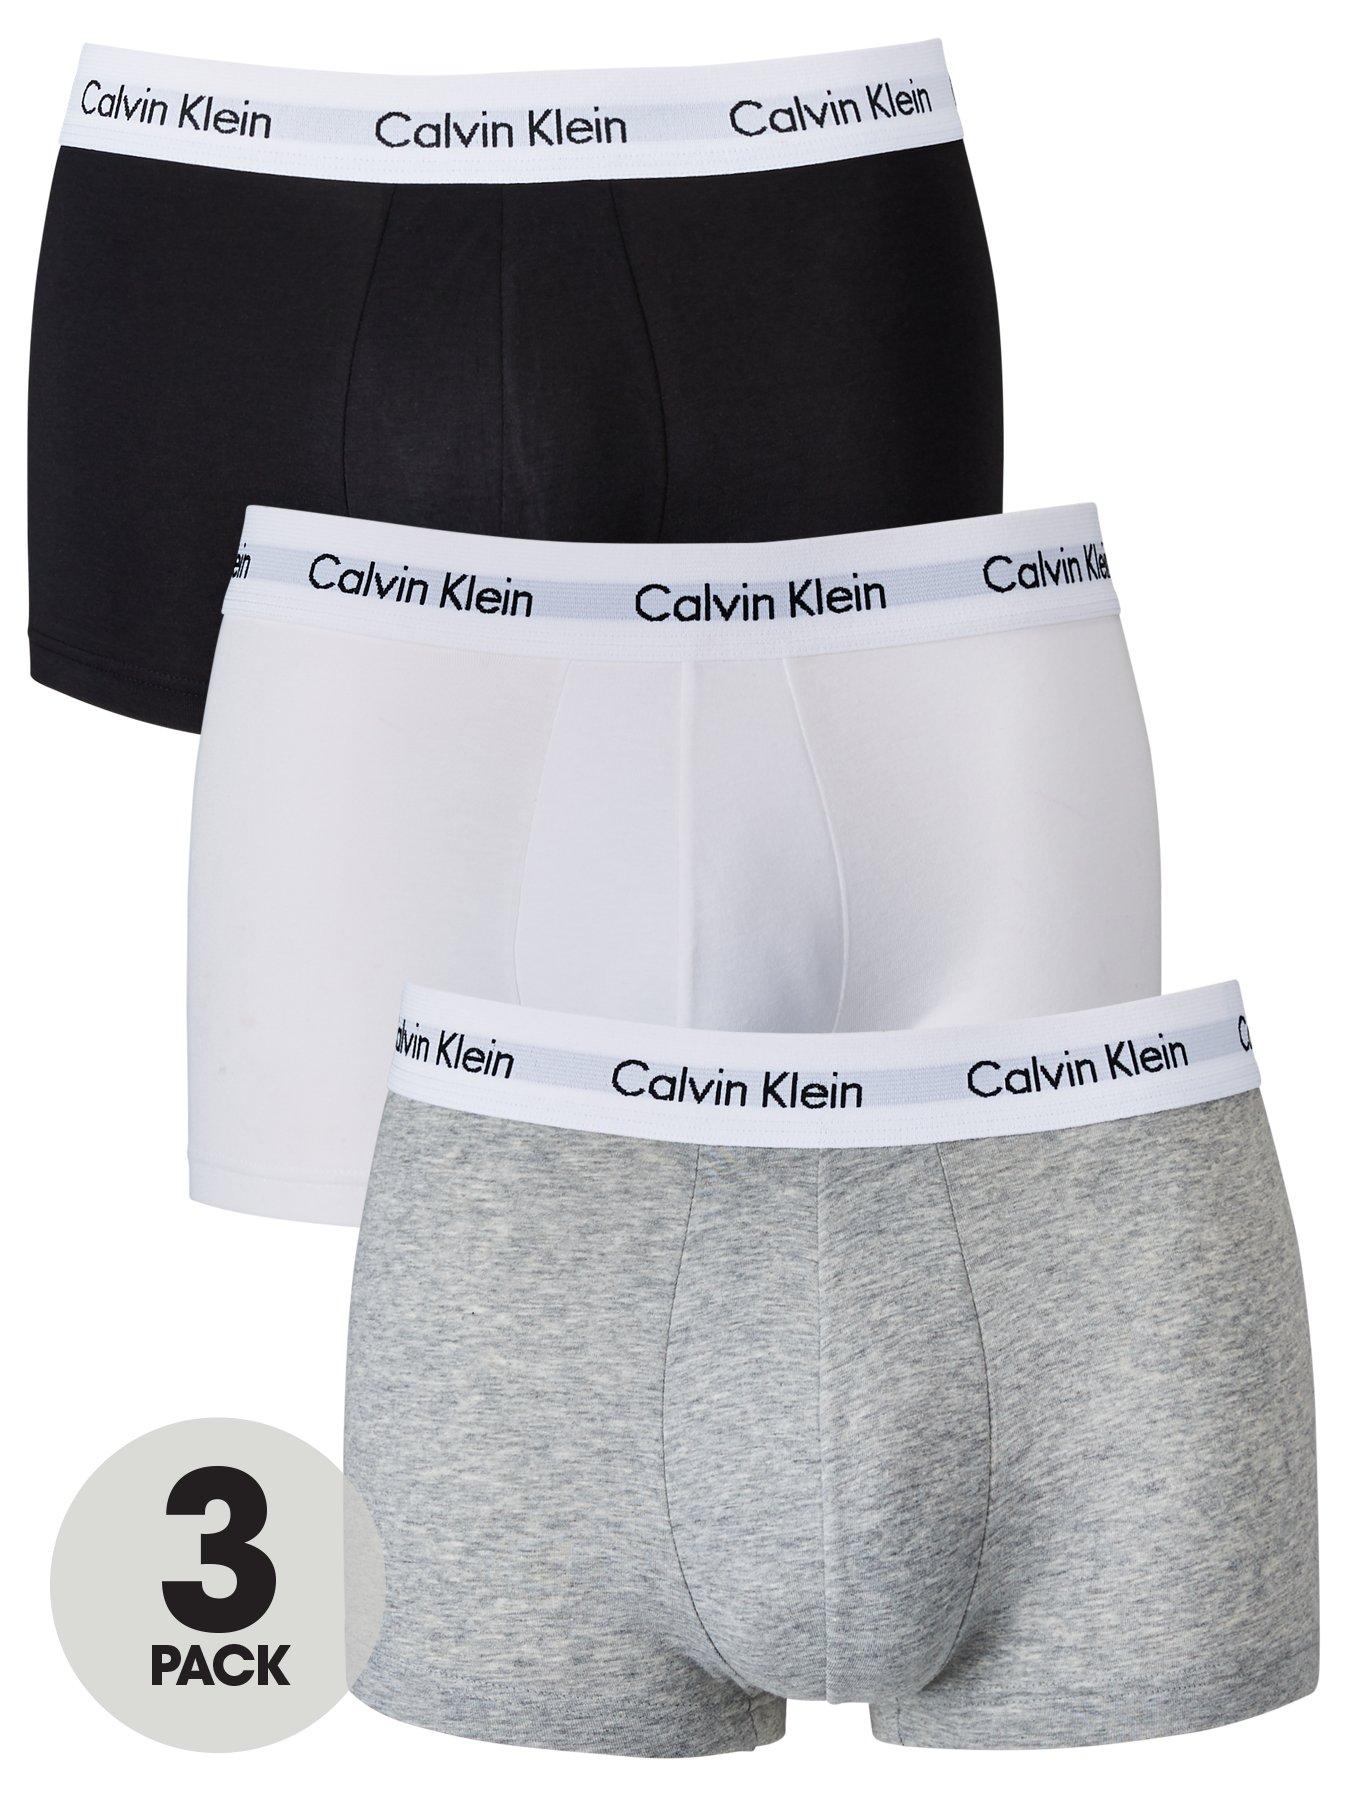 Boxer shorts Calvin Klein Black Holiday Low Rise Trunk 3-Pack